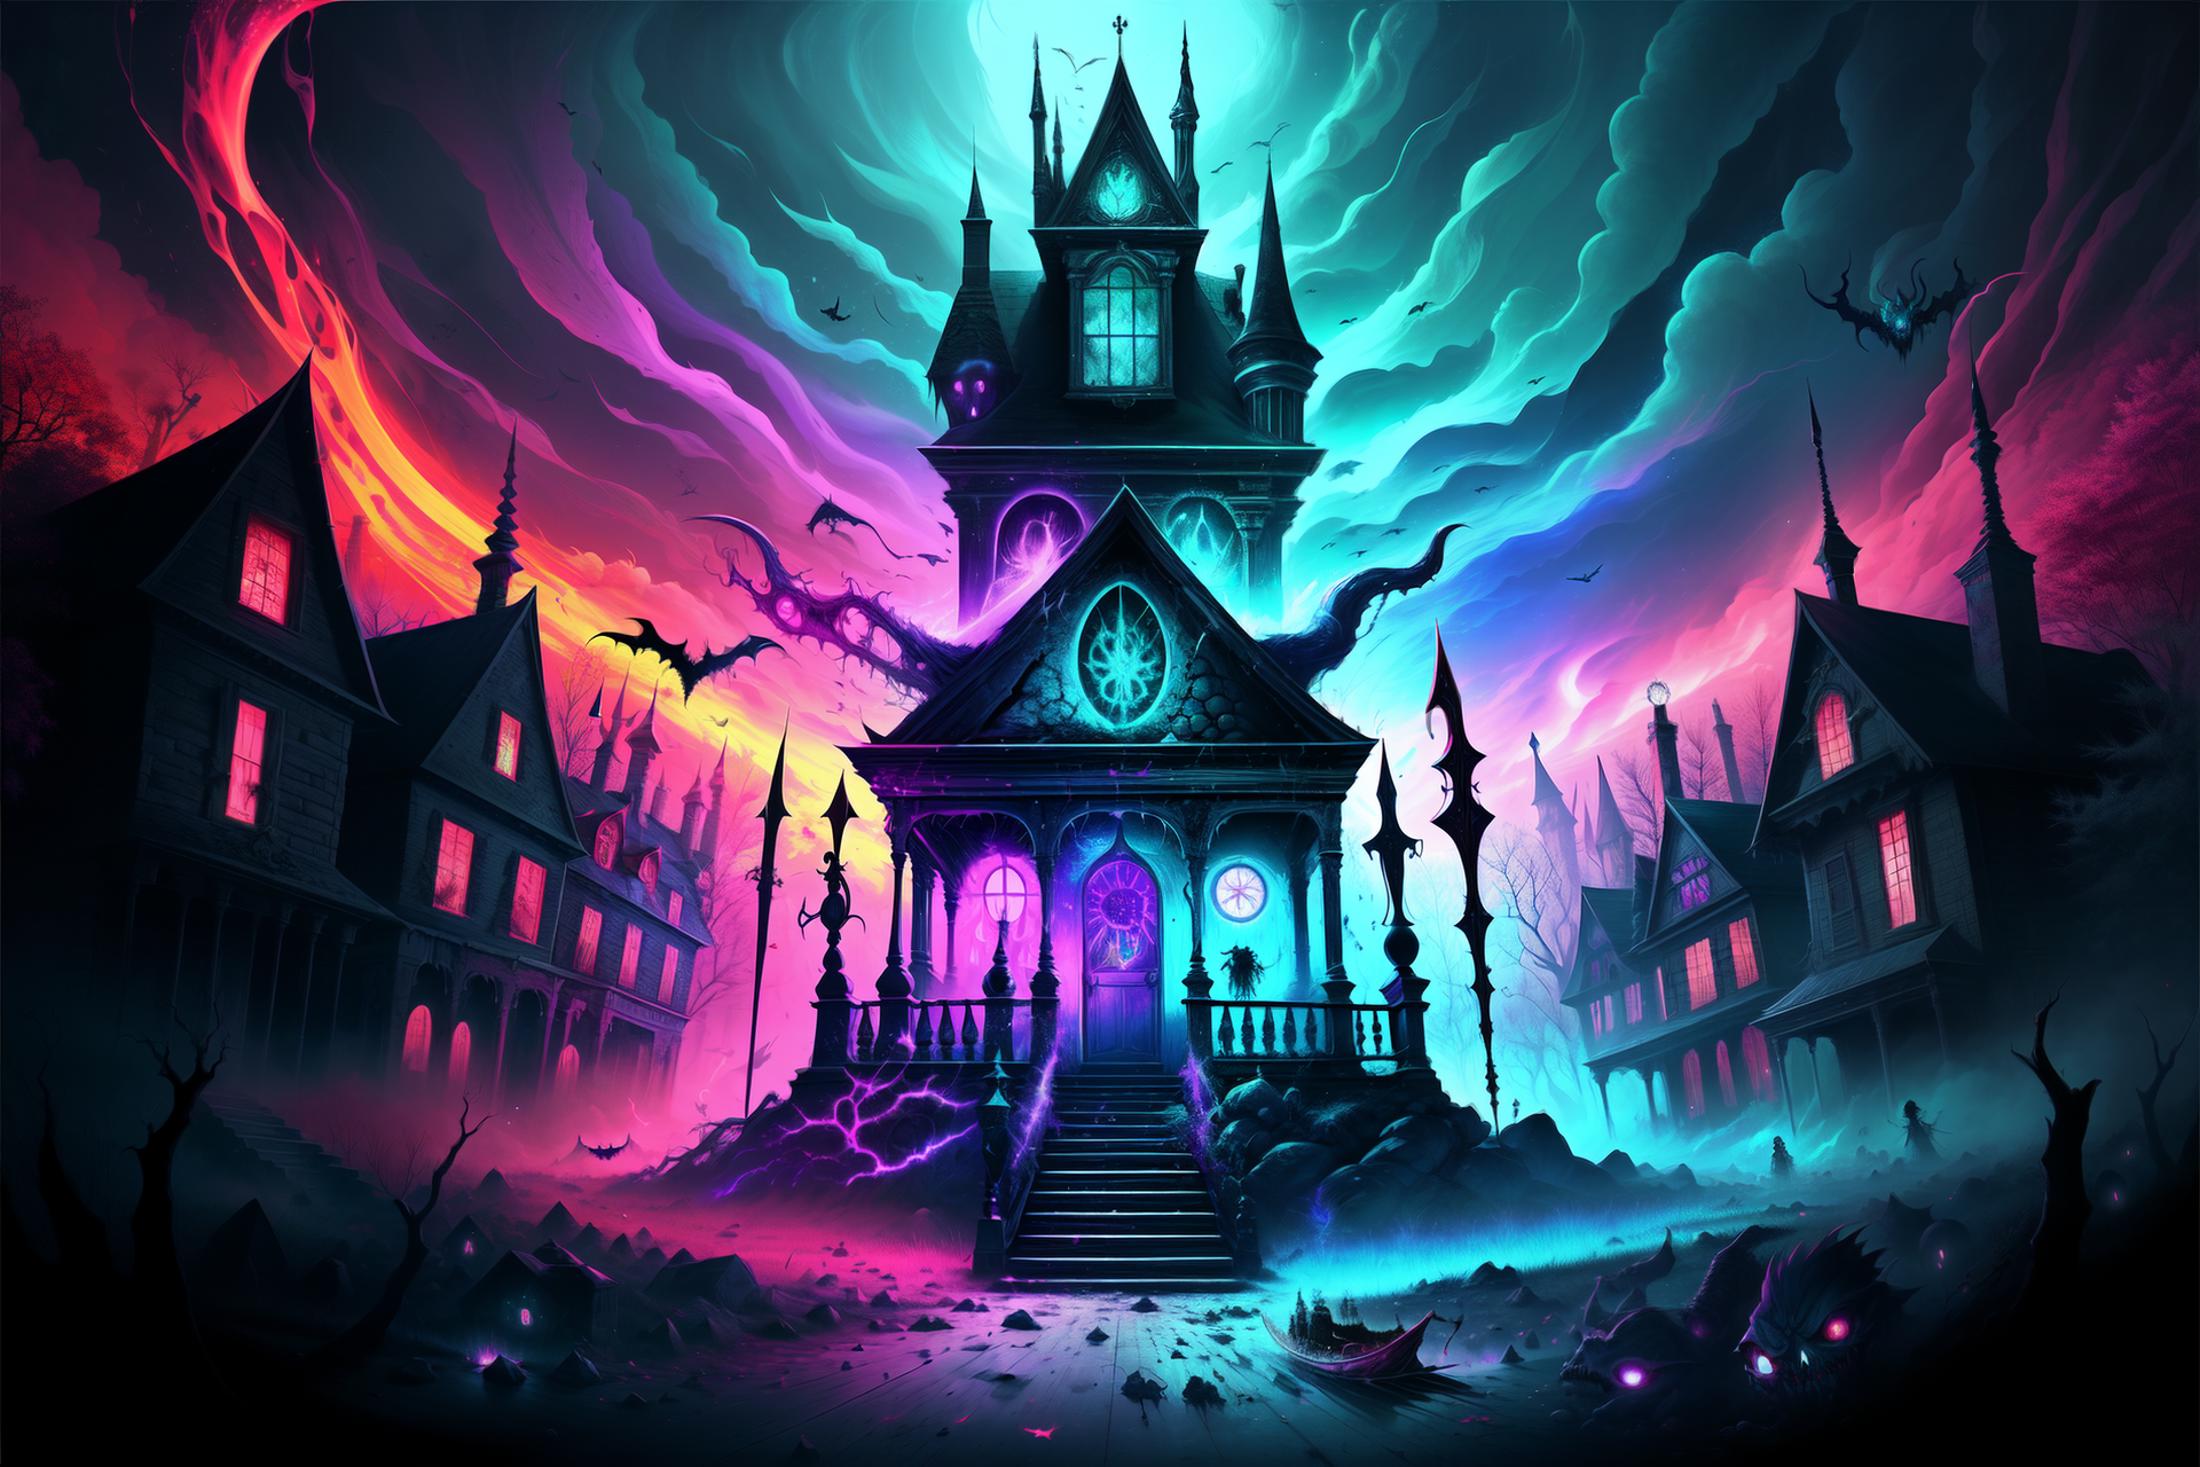 Colorful Horrors image by Clonephaze